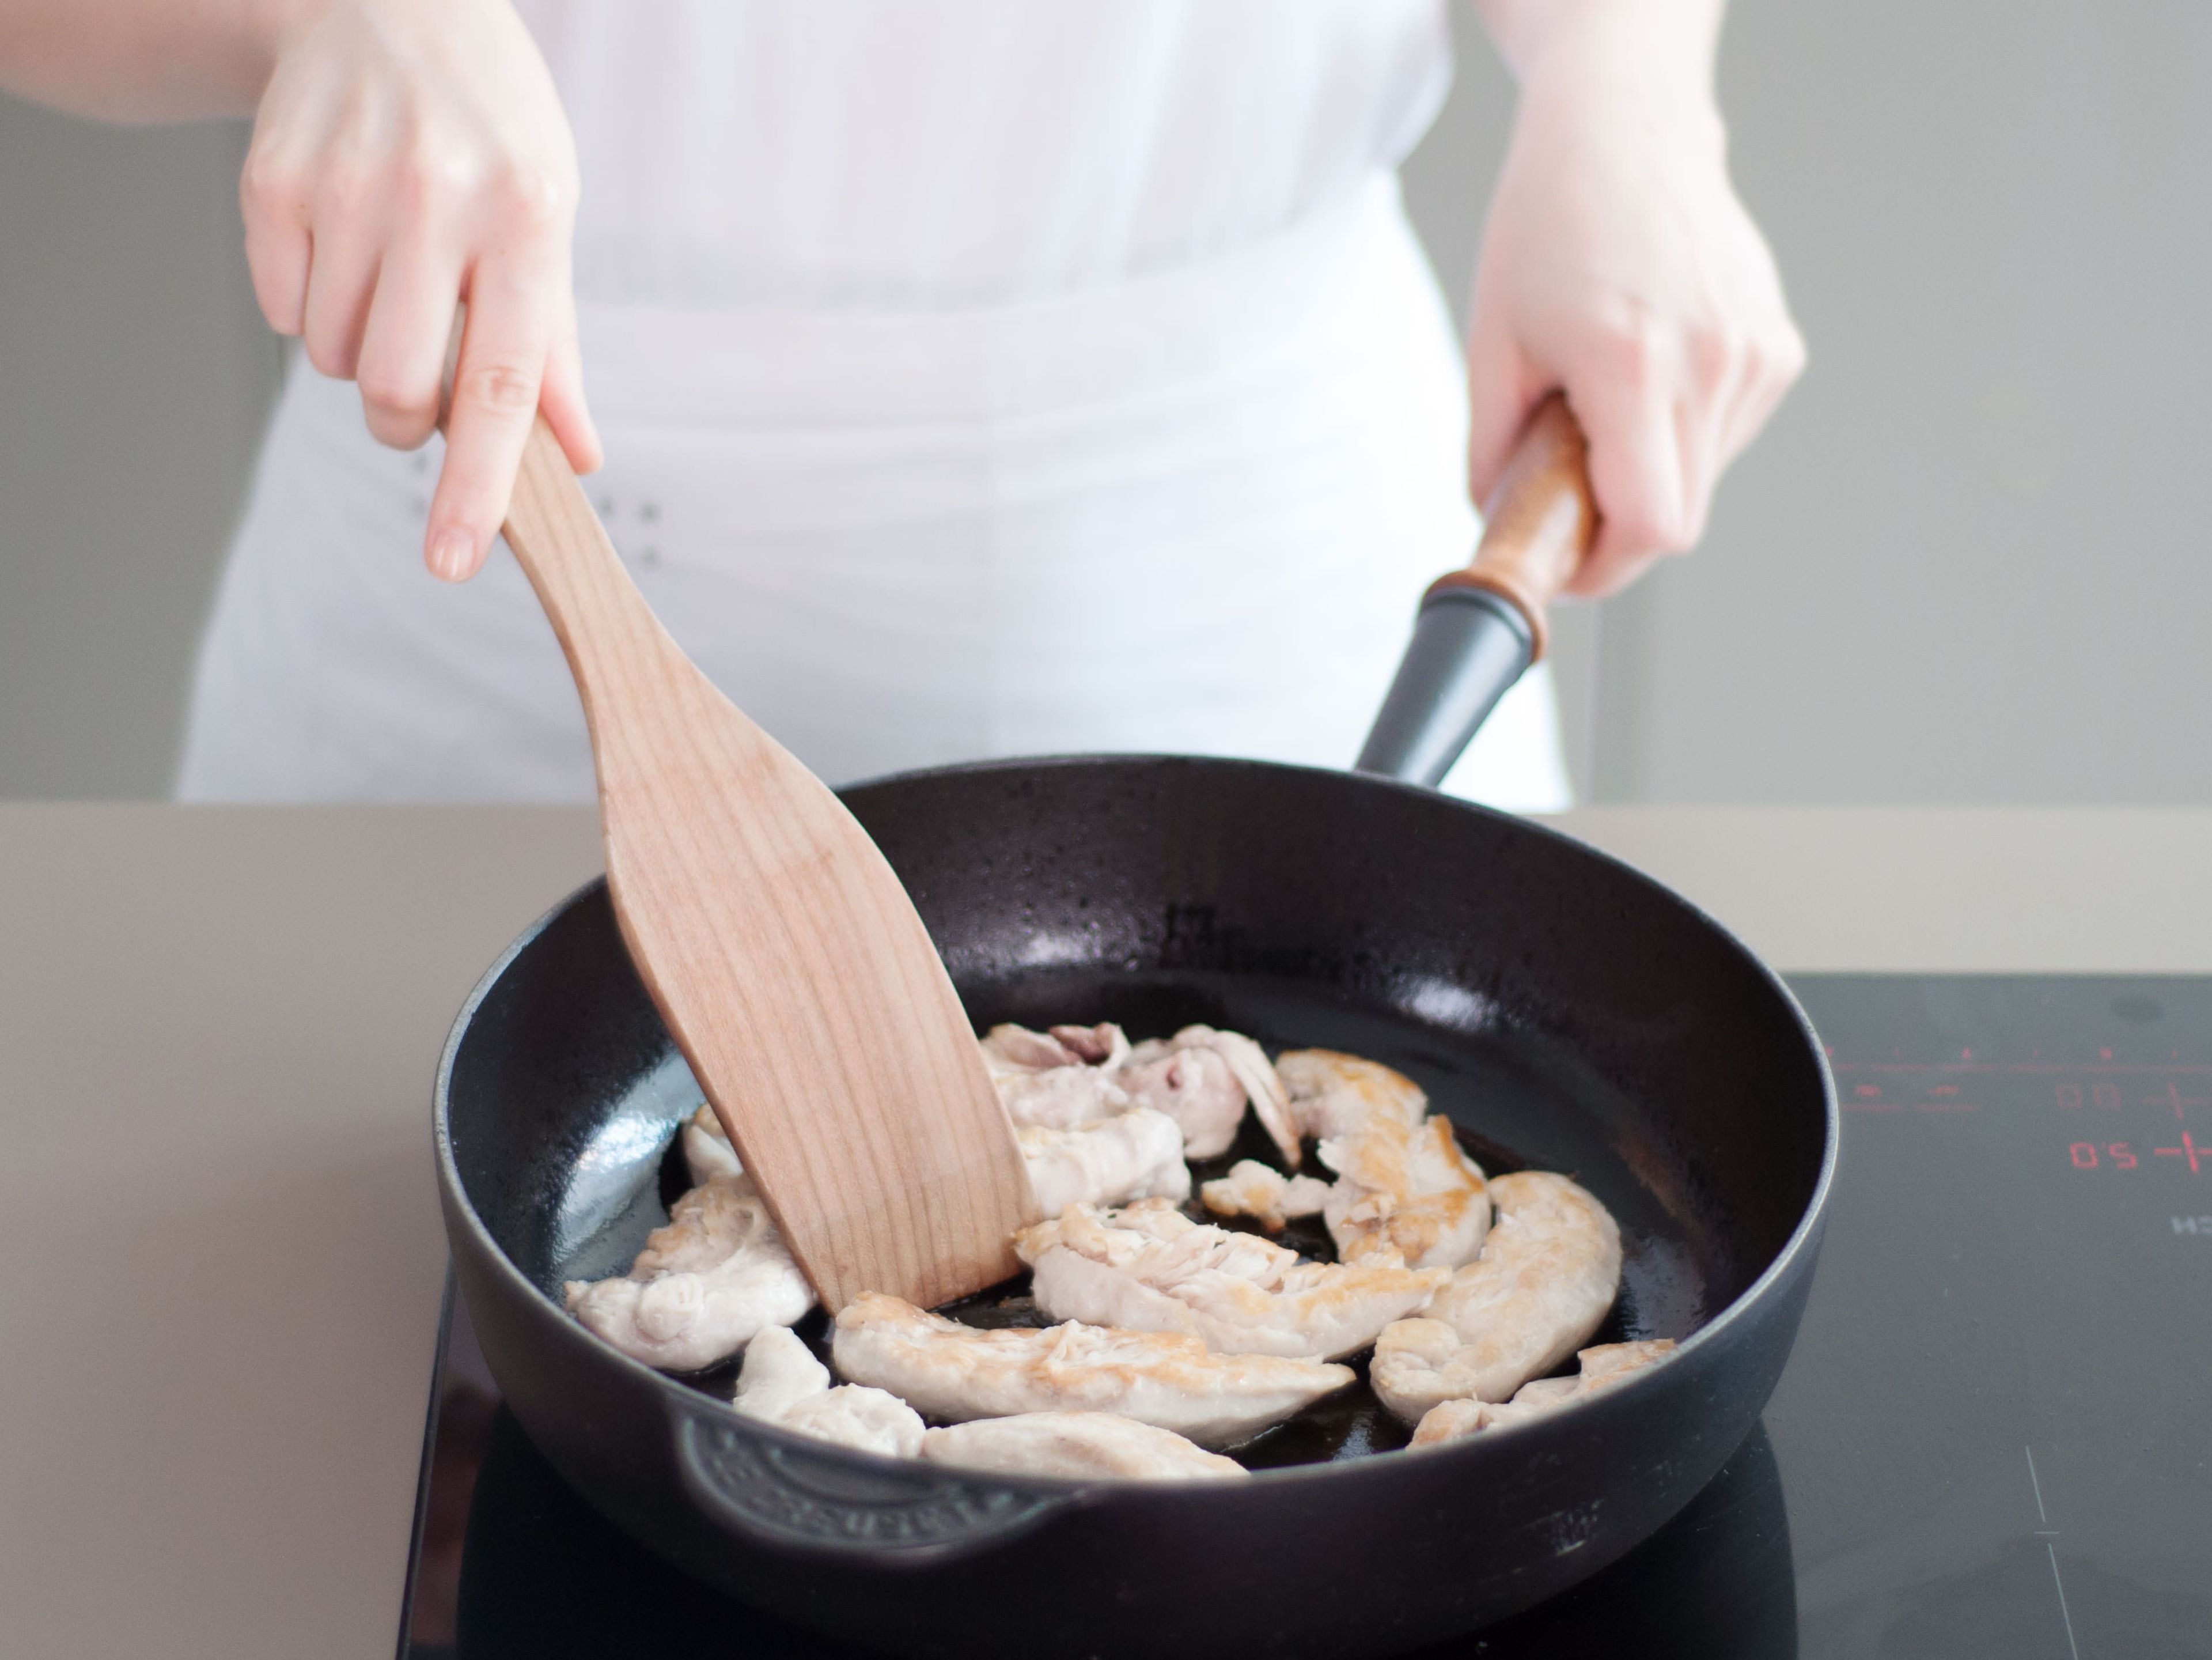 Heat half of the vegetable oil in a large skillet over high heat. Add chicken pieces and sauté for approx. 5 – 7 min. until golden. Transfer to a plate and set aside.